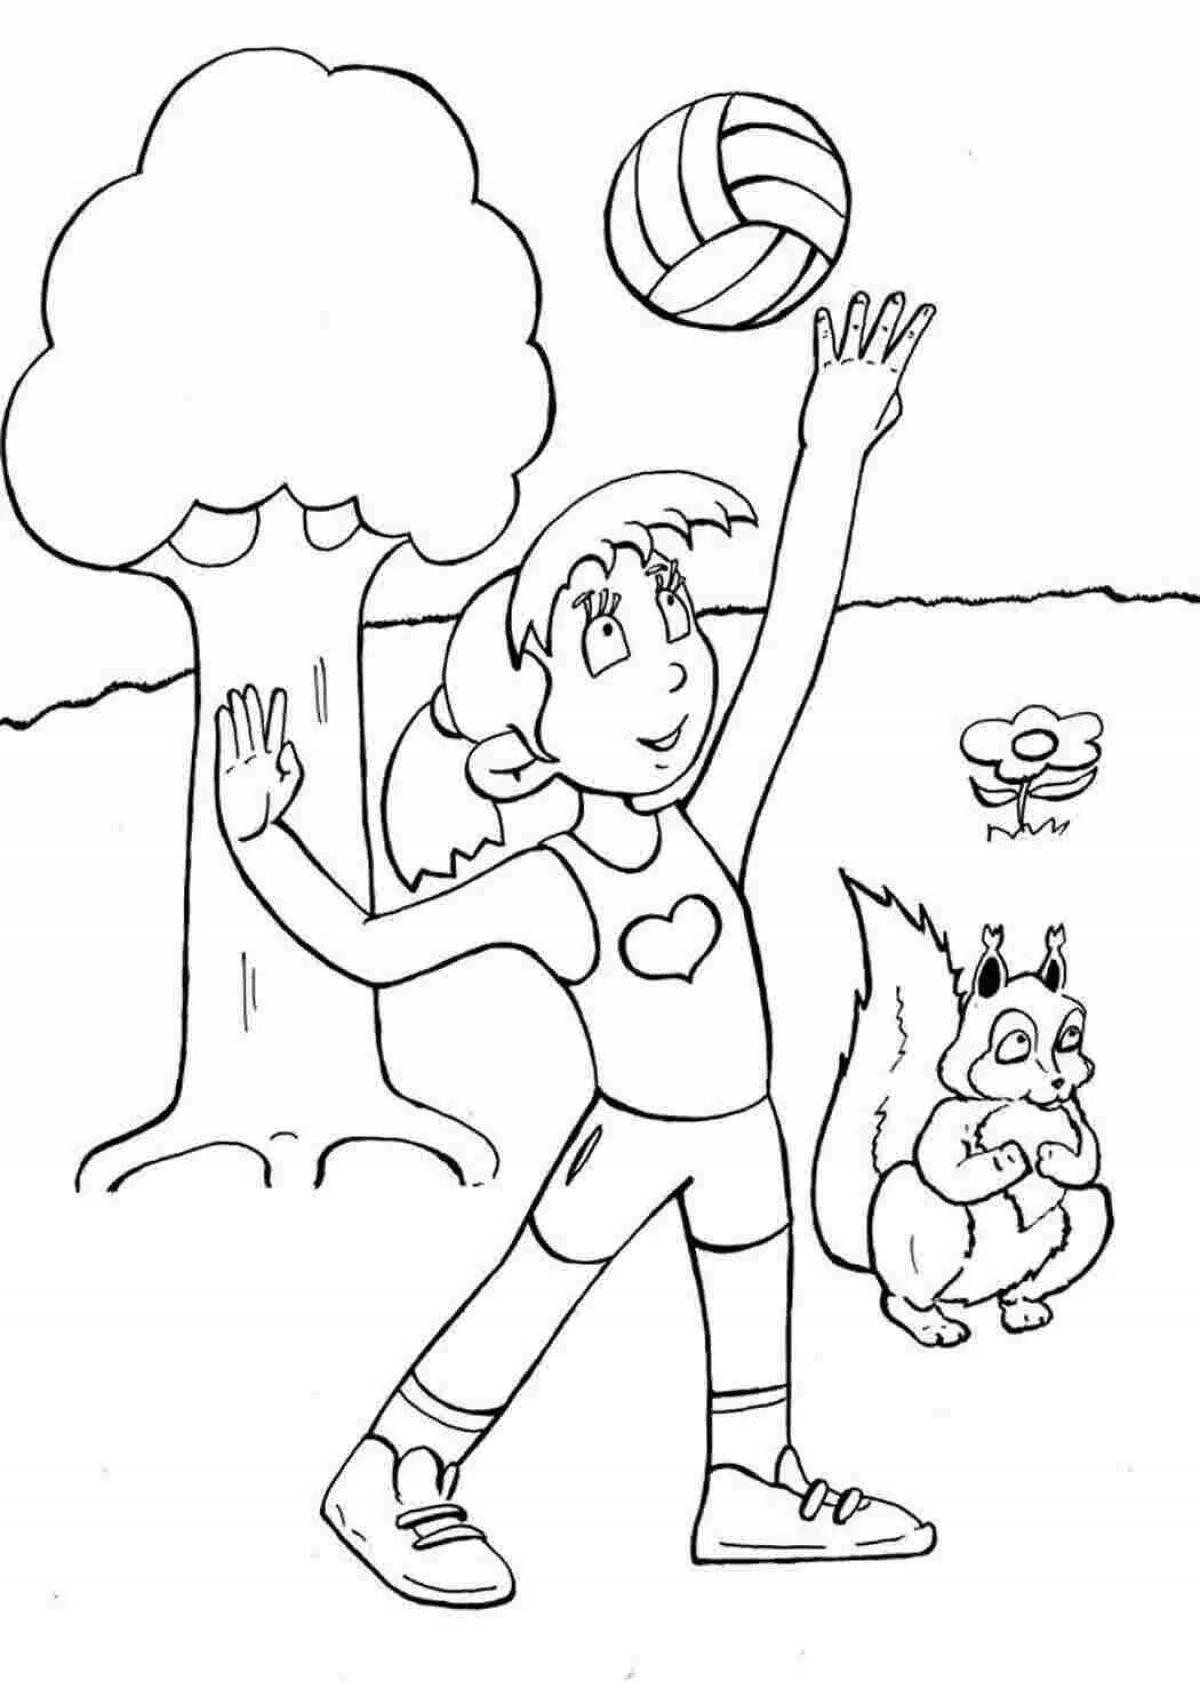 Serene wellness coloring page